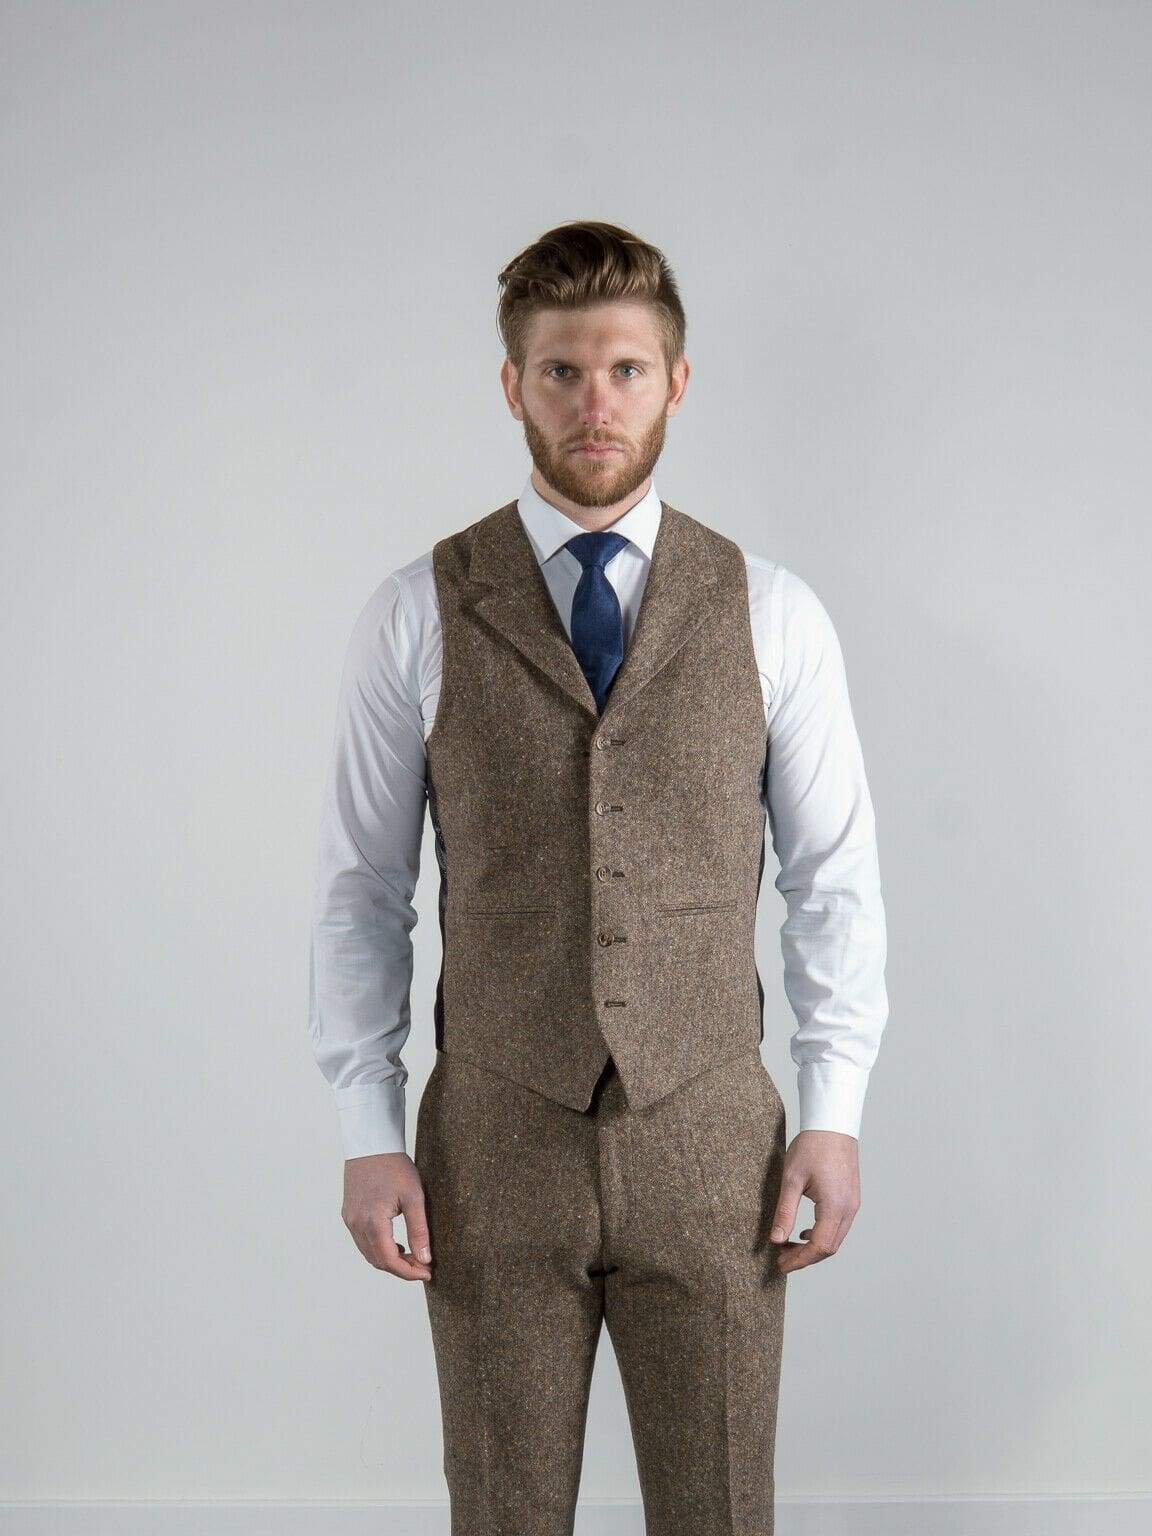 Mens Vintage Tweed Suits  3 Piece  Double Breasted  XPOSED